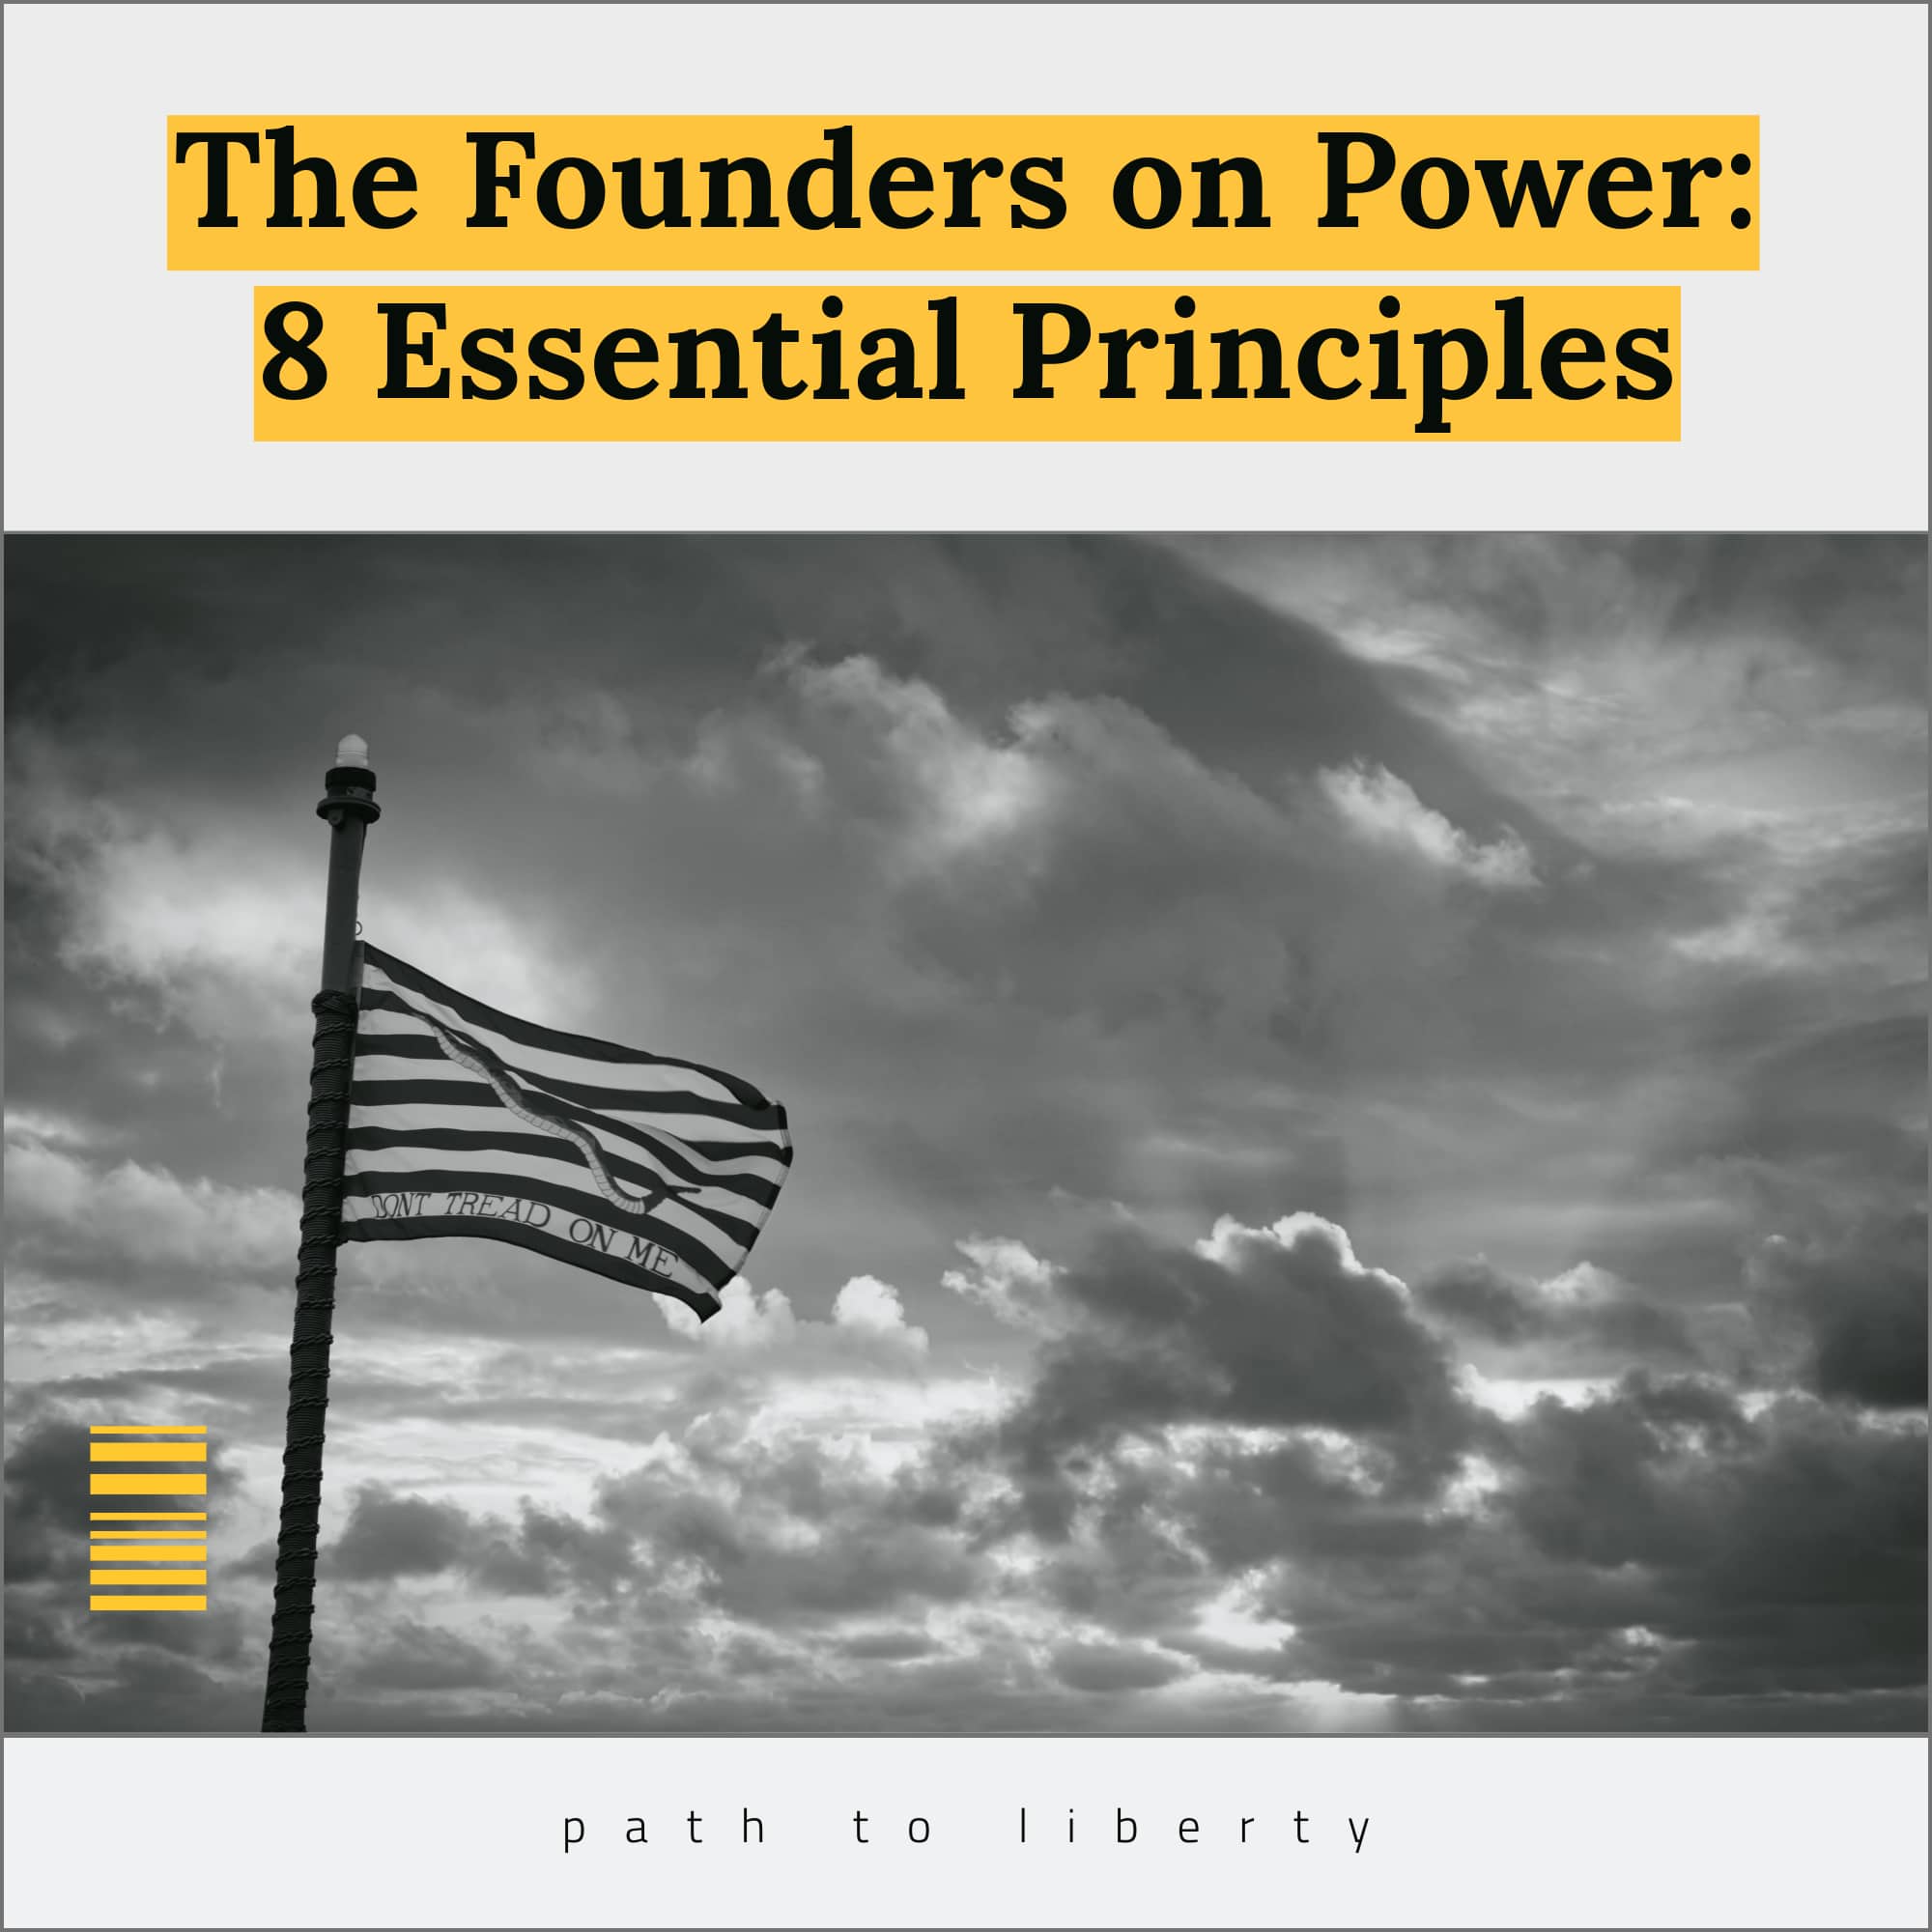 The Founders on Power: 8 Essential Principles for a FREE Society